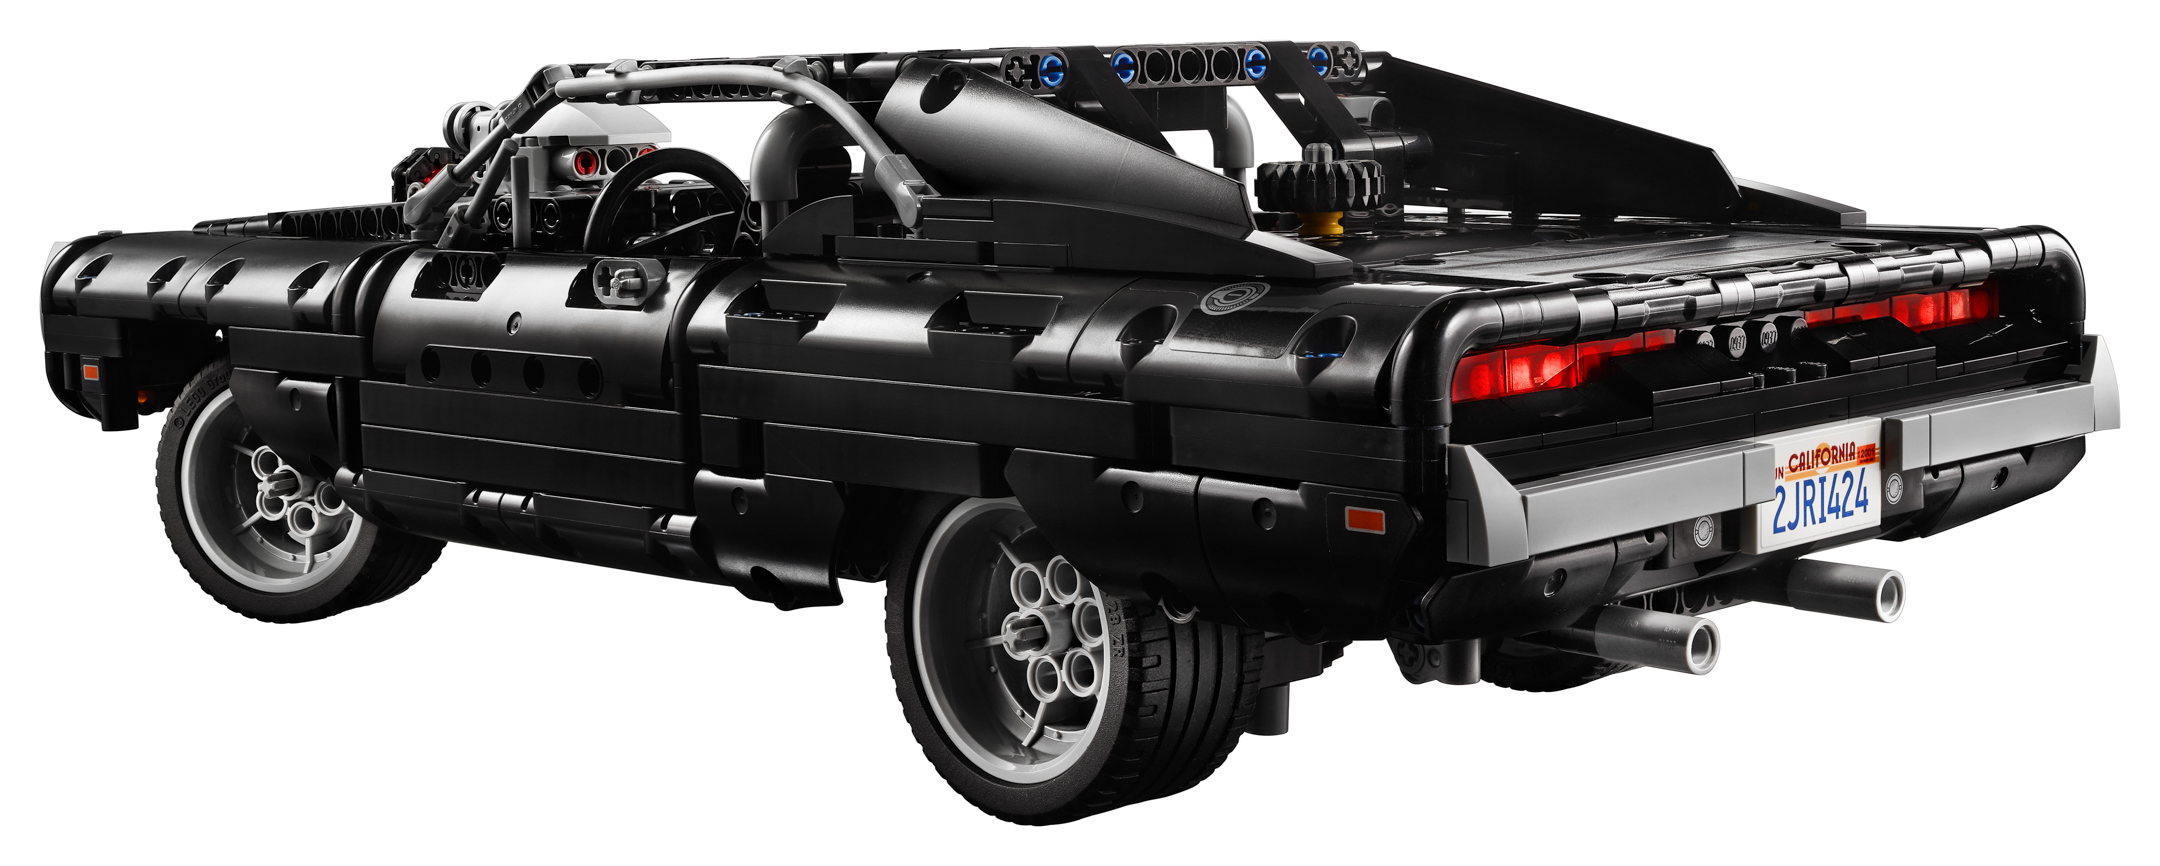 lego-technic-fast-furious-42111-doms-dodge-charger-qhe0q-1